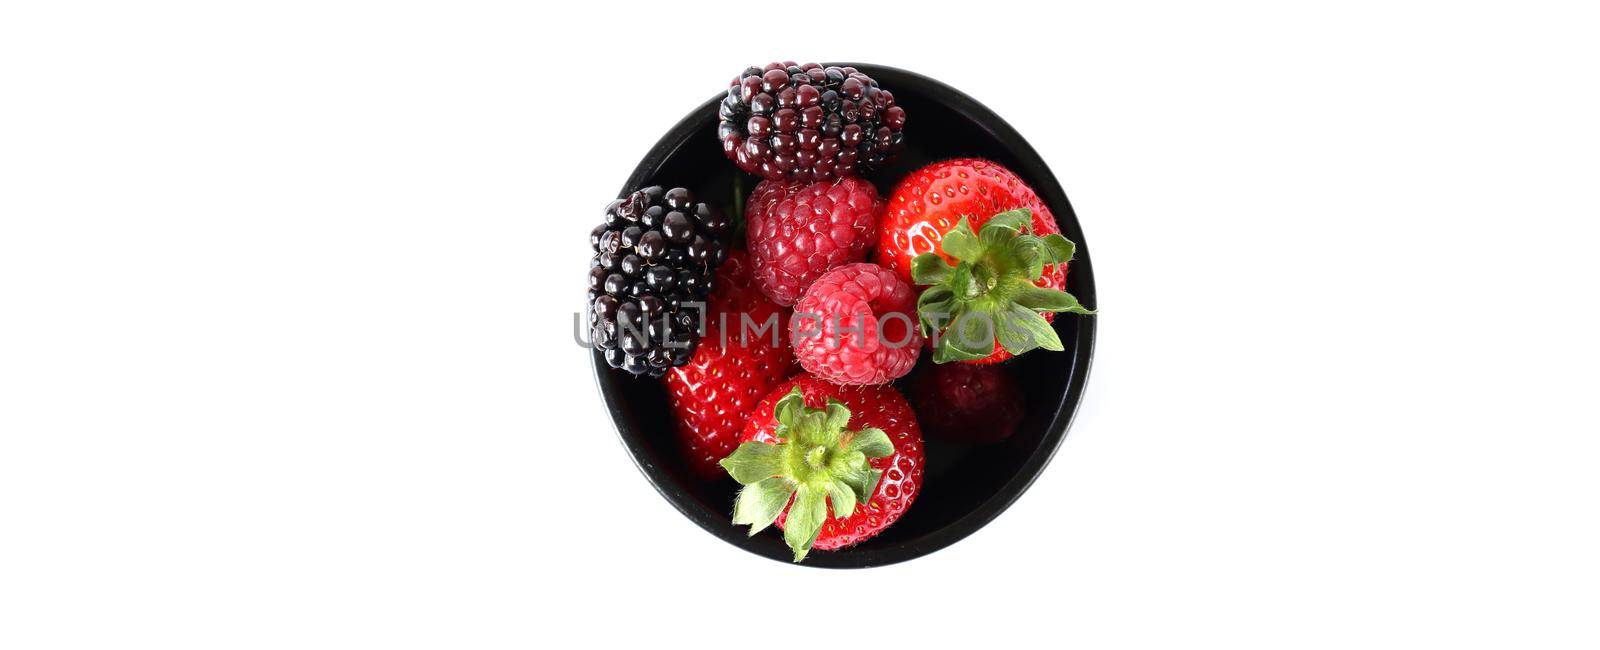 healthy breakfast with berries strawberries on white background